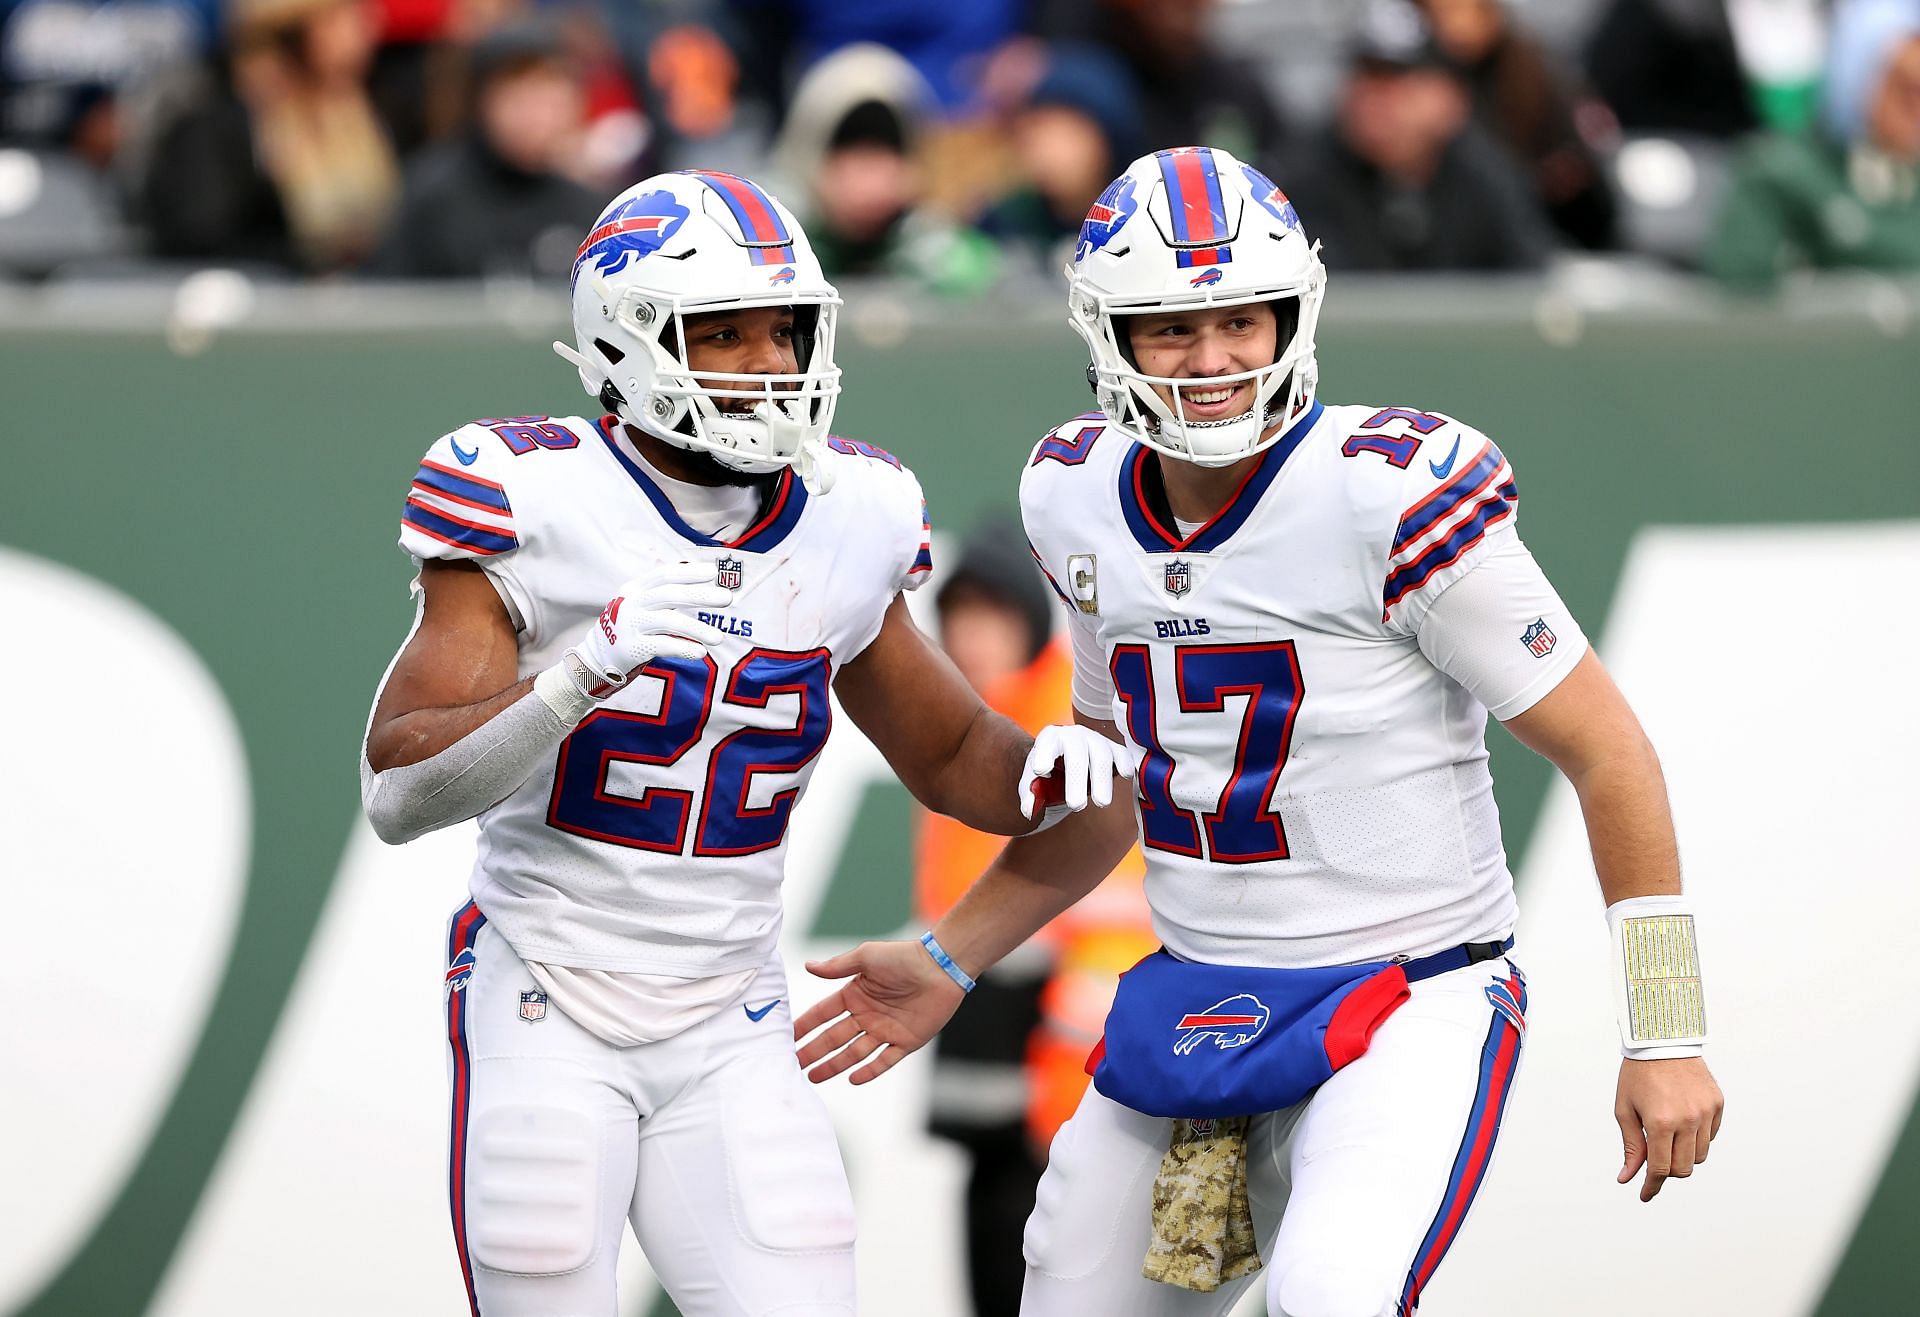 Buffalo Bills vs. New Orleans Saints injury report and starting lineup - Week 12 Day